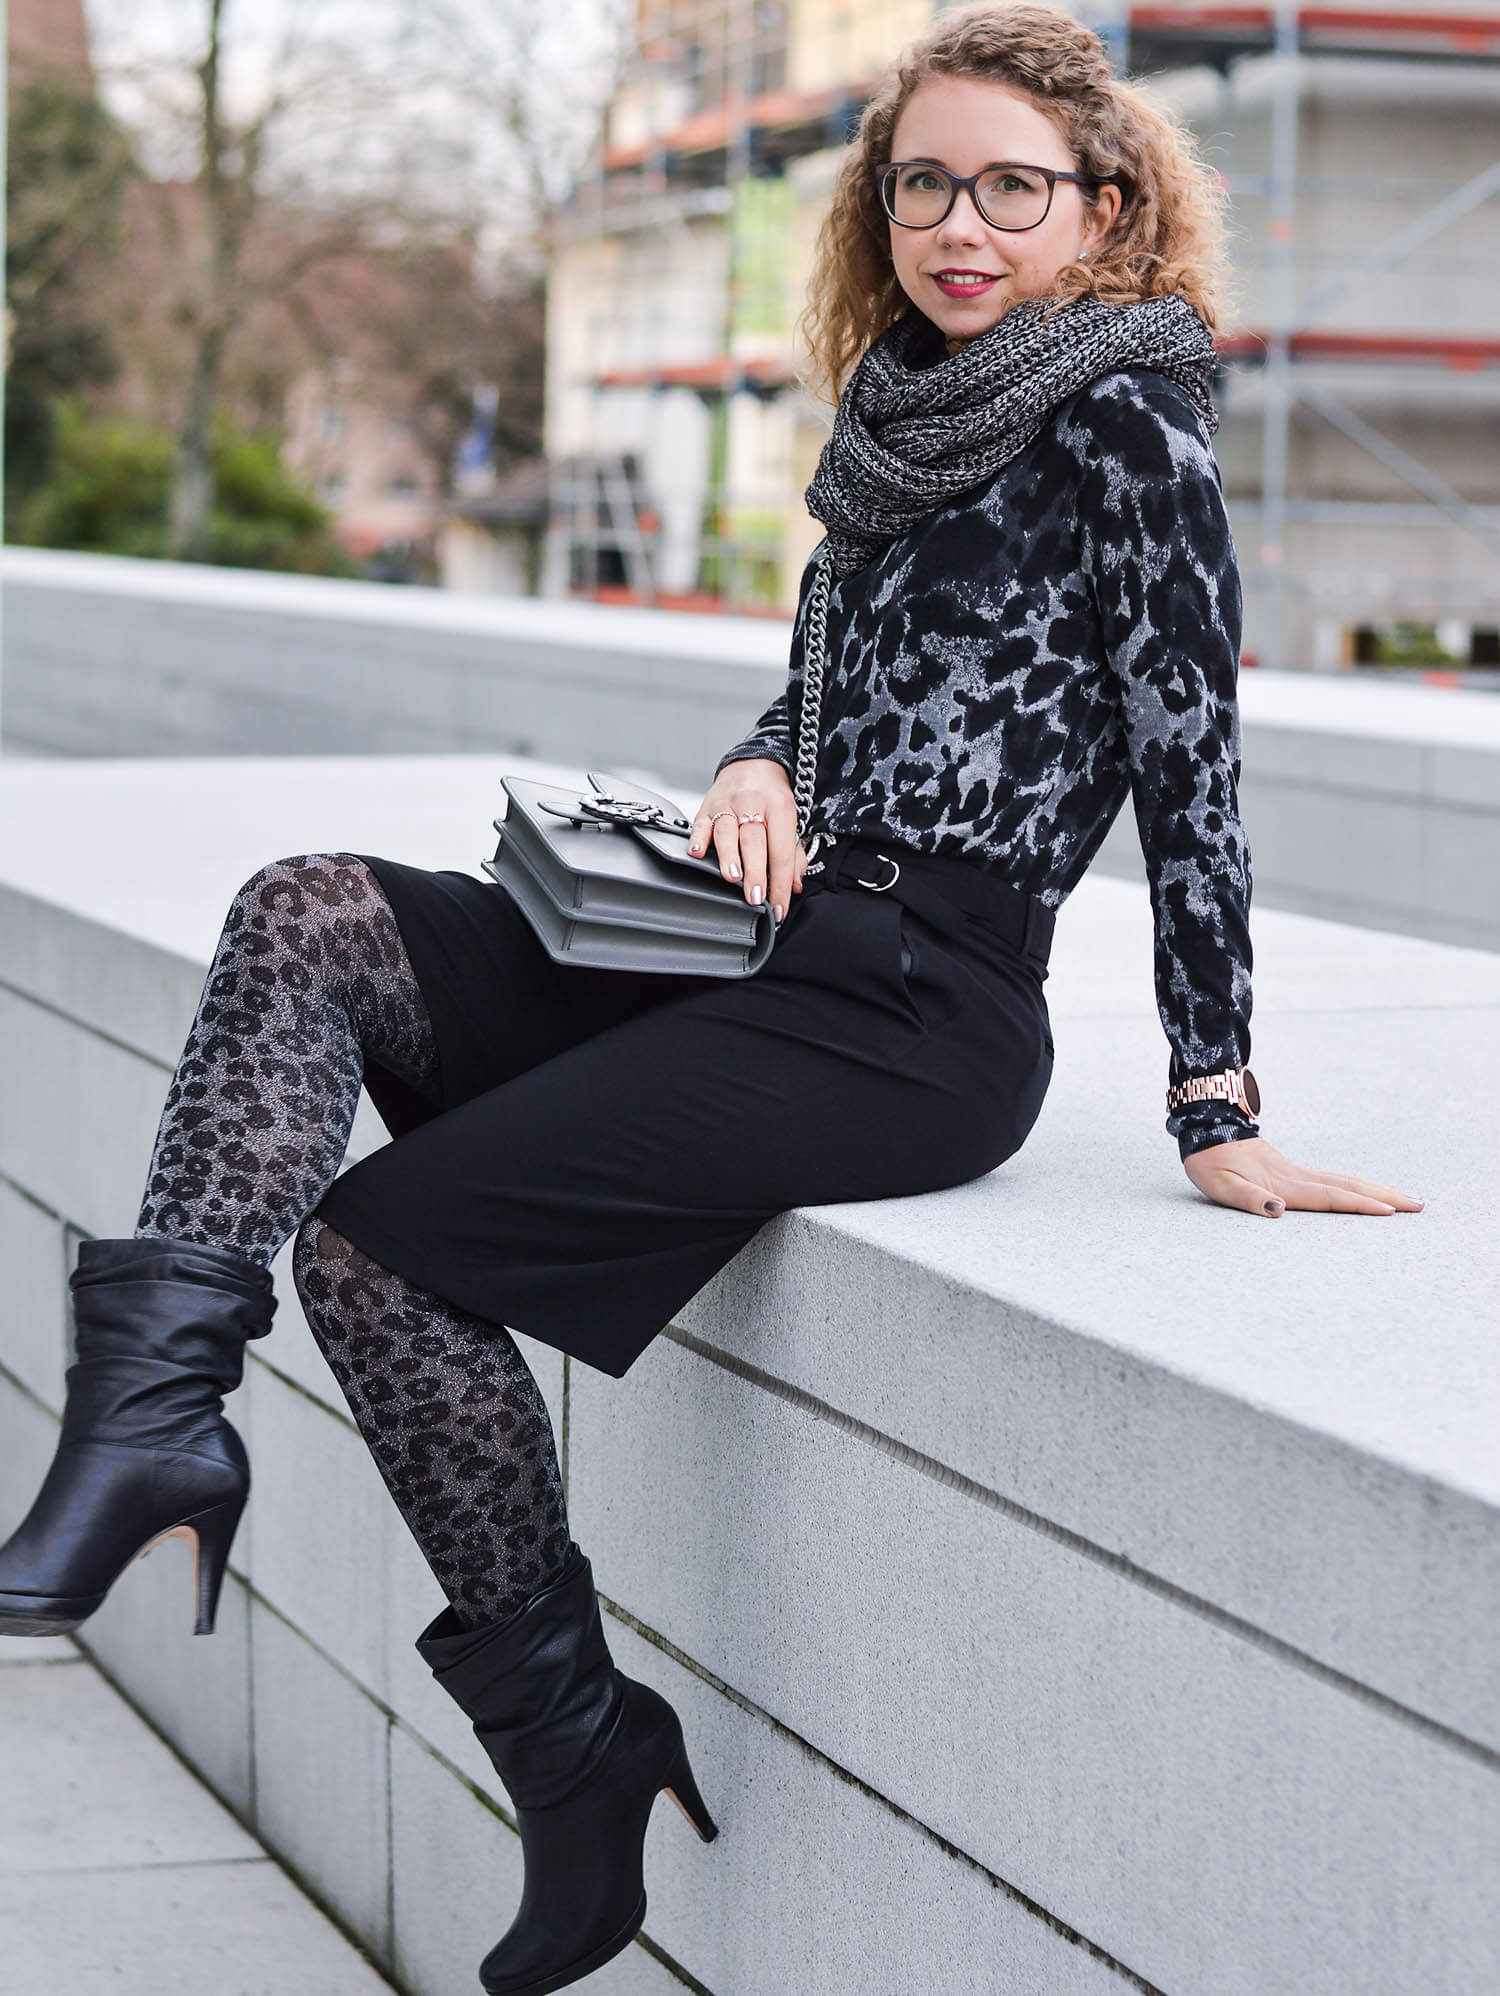 Kationette-Outfit-Grey-Leopard-with-Drykorn-sweater-and-Calzedonia-tights-fashionblogger-nrw-streetstyle